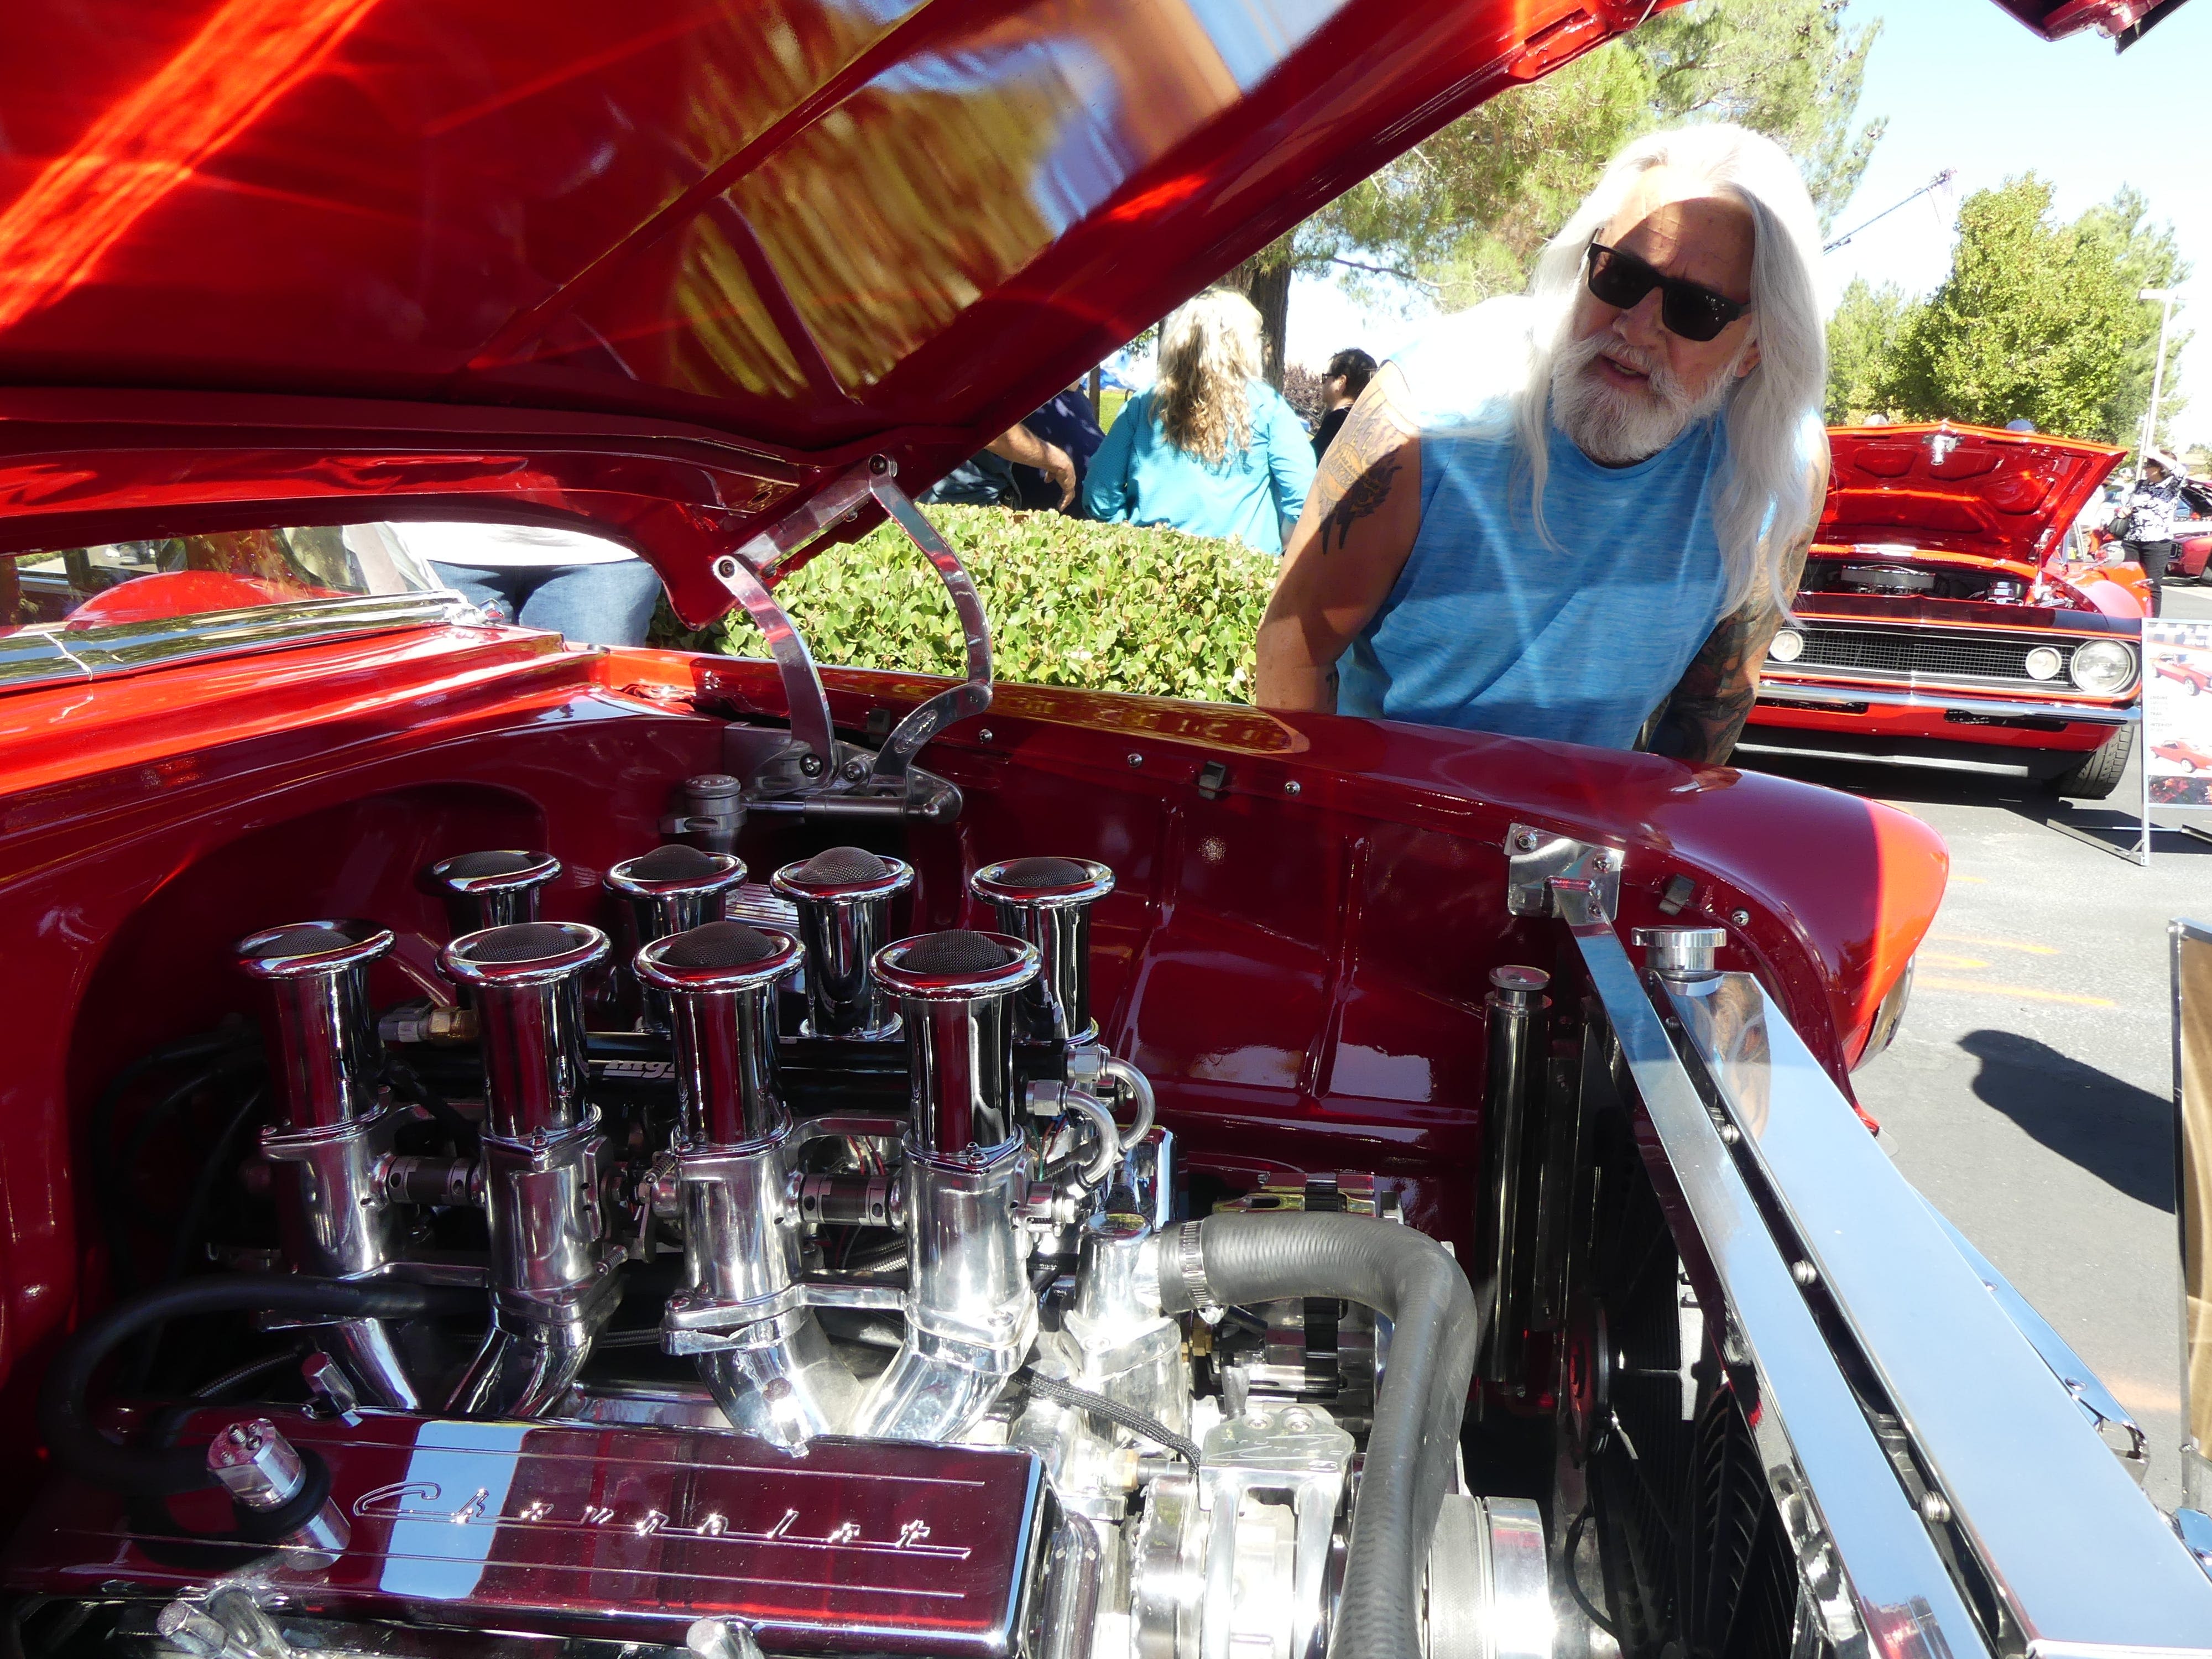 'Checking out cars, eating tacos’ at Church for Whosoever's Car Show and Vendor Fair